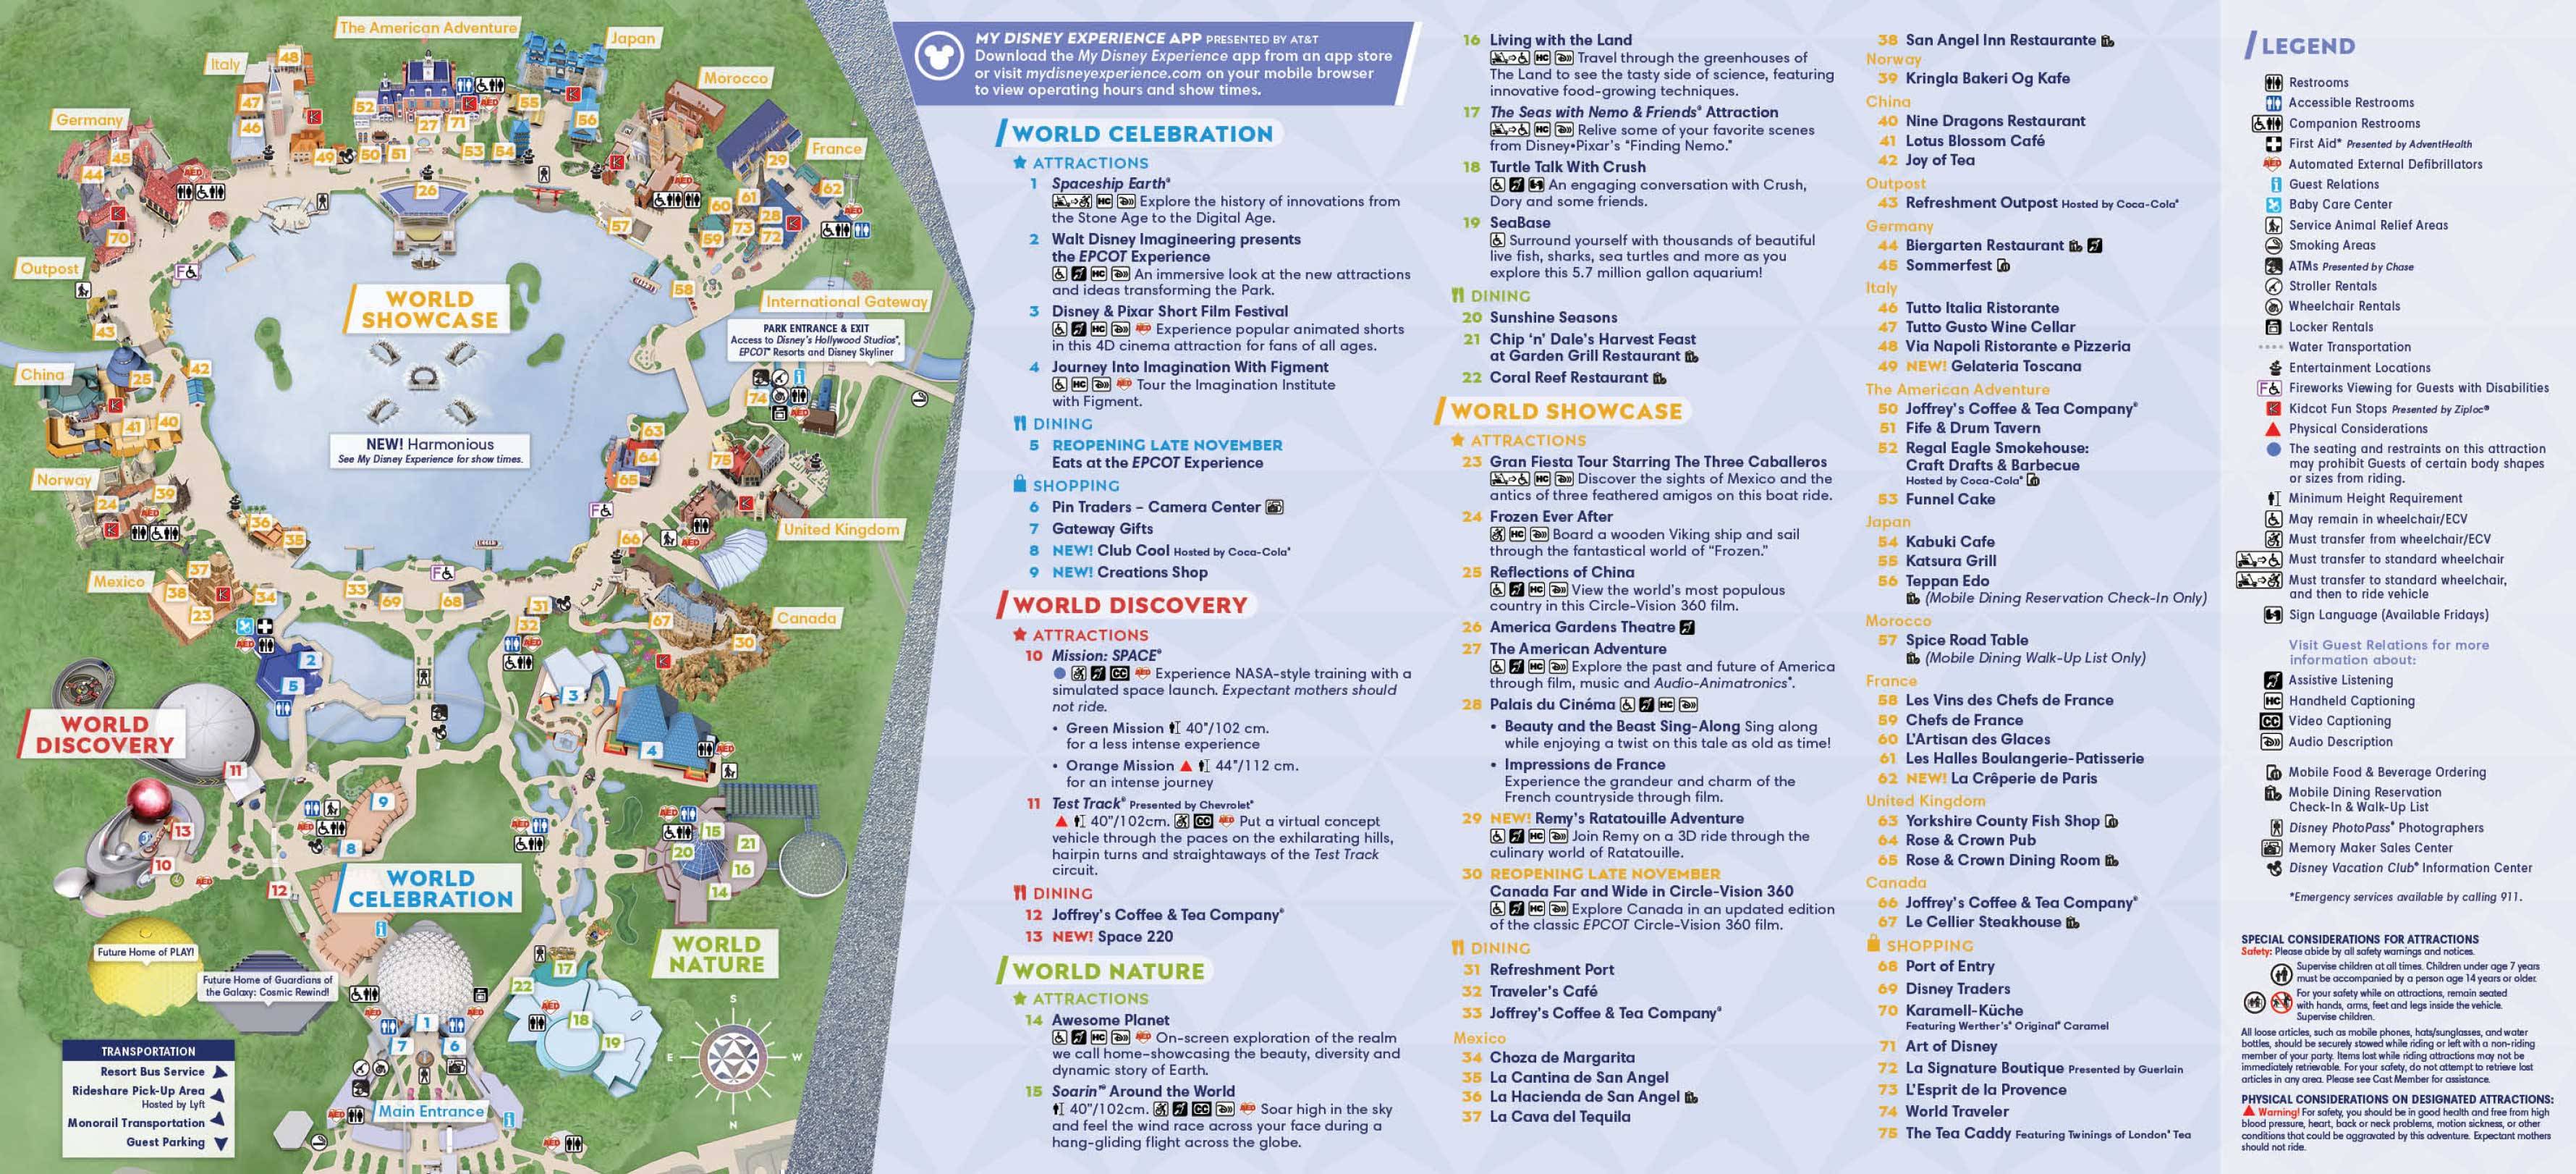 EPCOT guide map featuring new neighborhoods